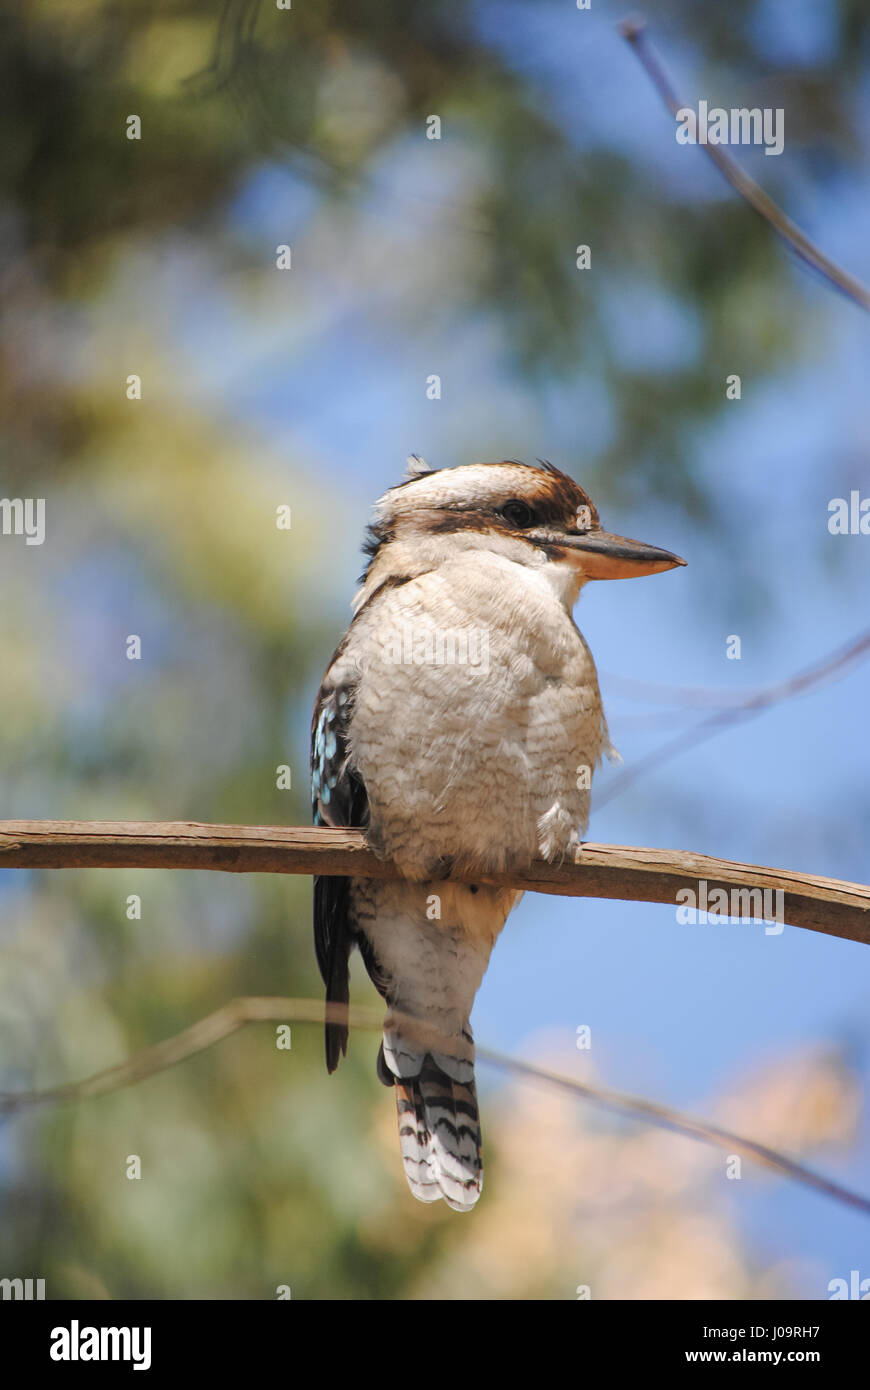 A wild Kookaburra sitting on a tree branch. Primary and shallow focus on the bird with everything else in the background and foreground in soft, dream Stock Photo